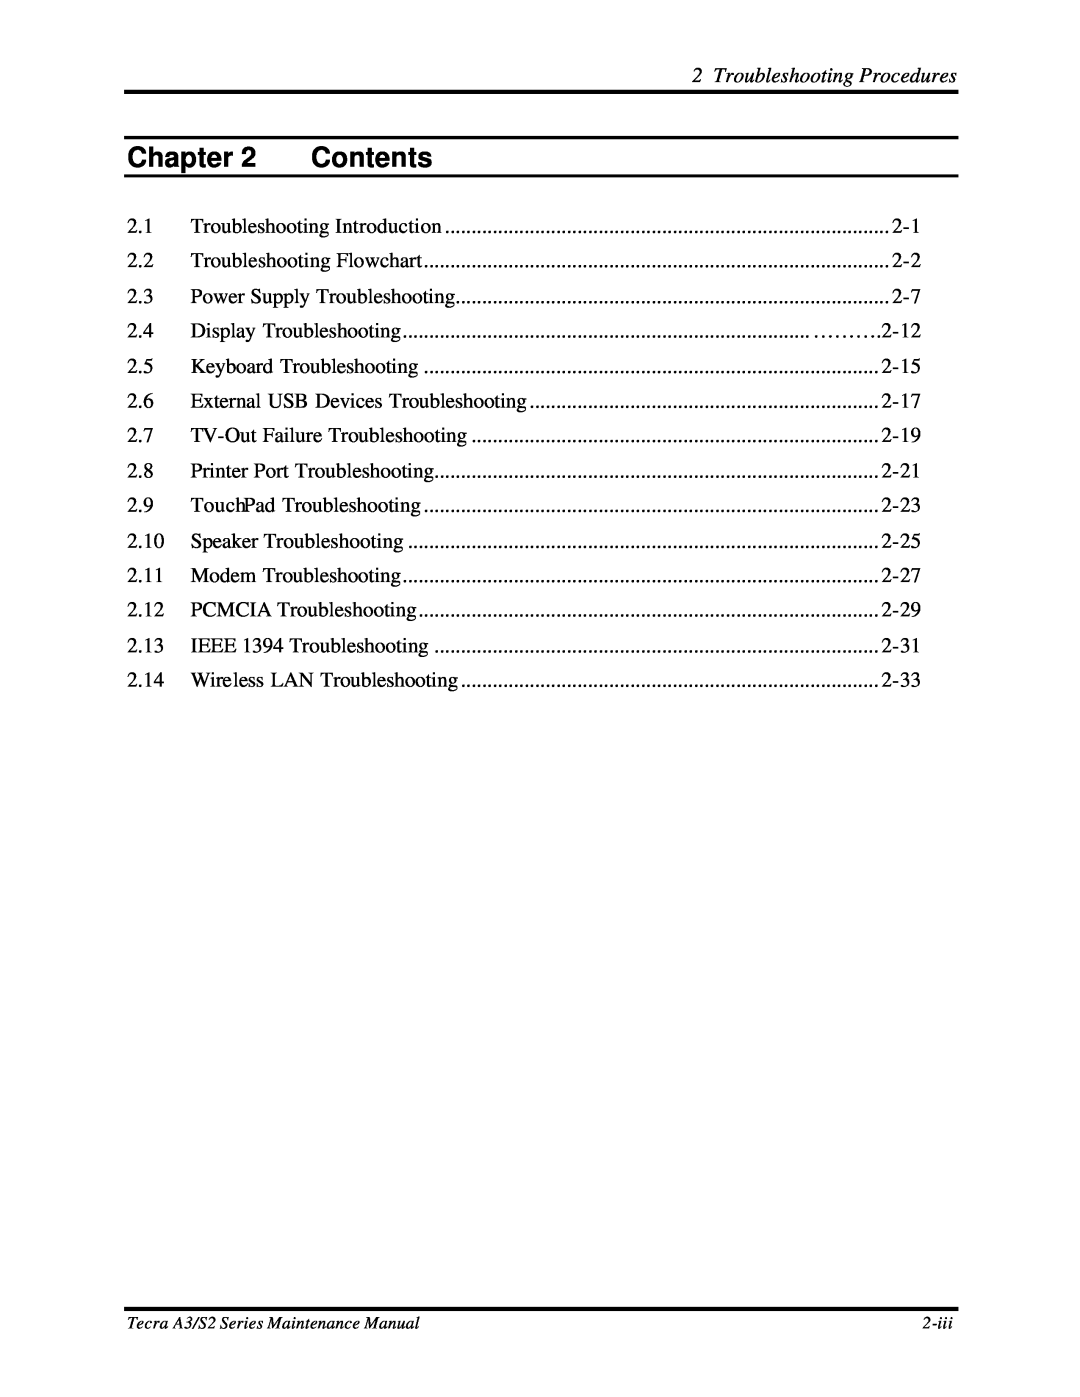 Toshiba S2 manual Chapter, Contents, Troubleshooting Procedures, Troubleshooting Introduction 